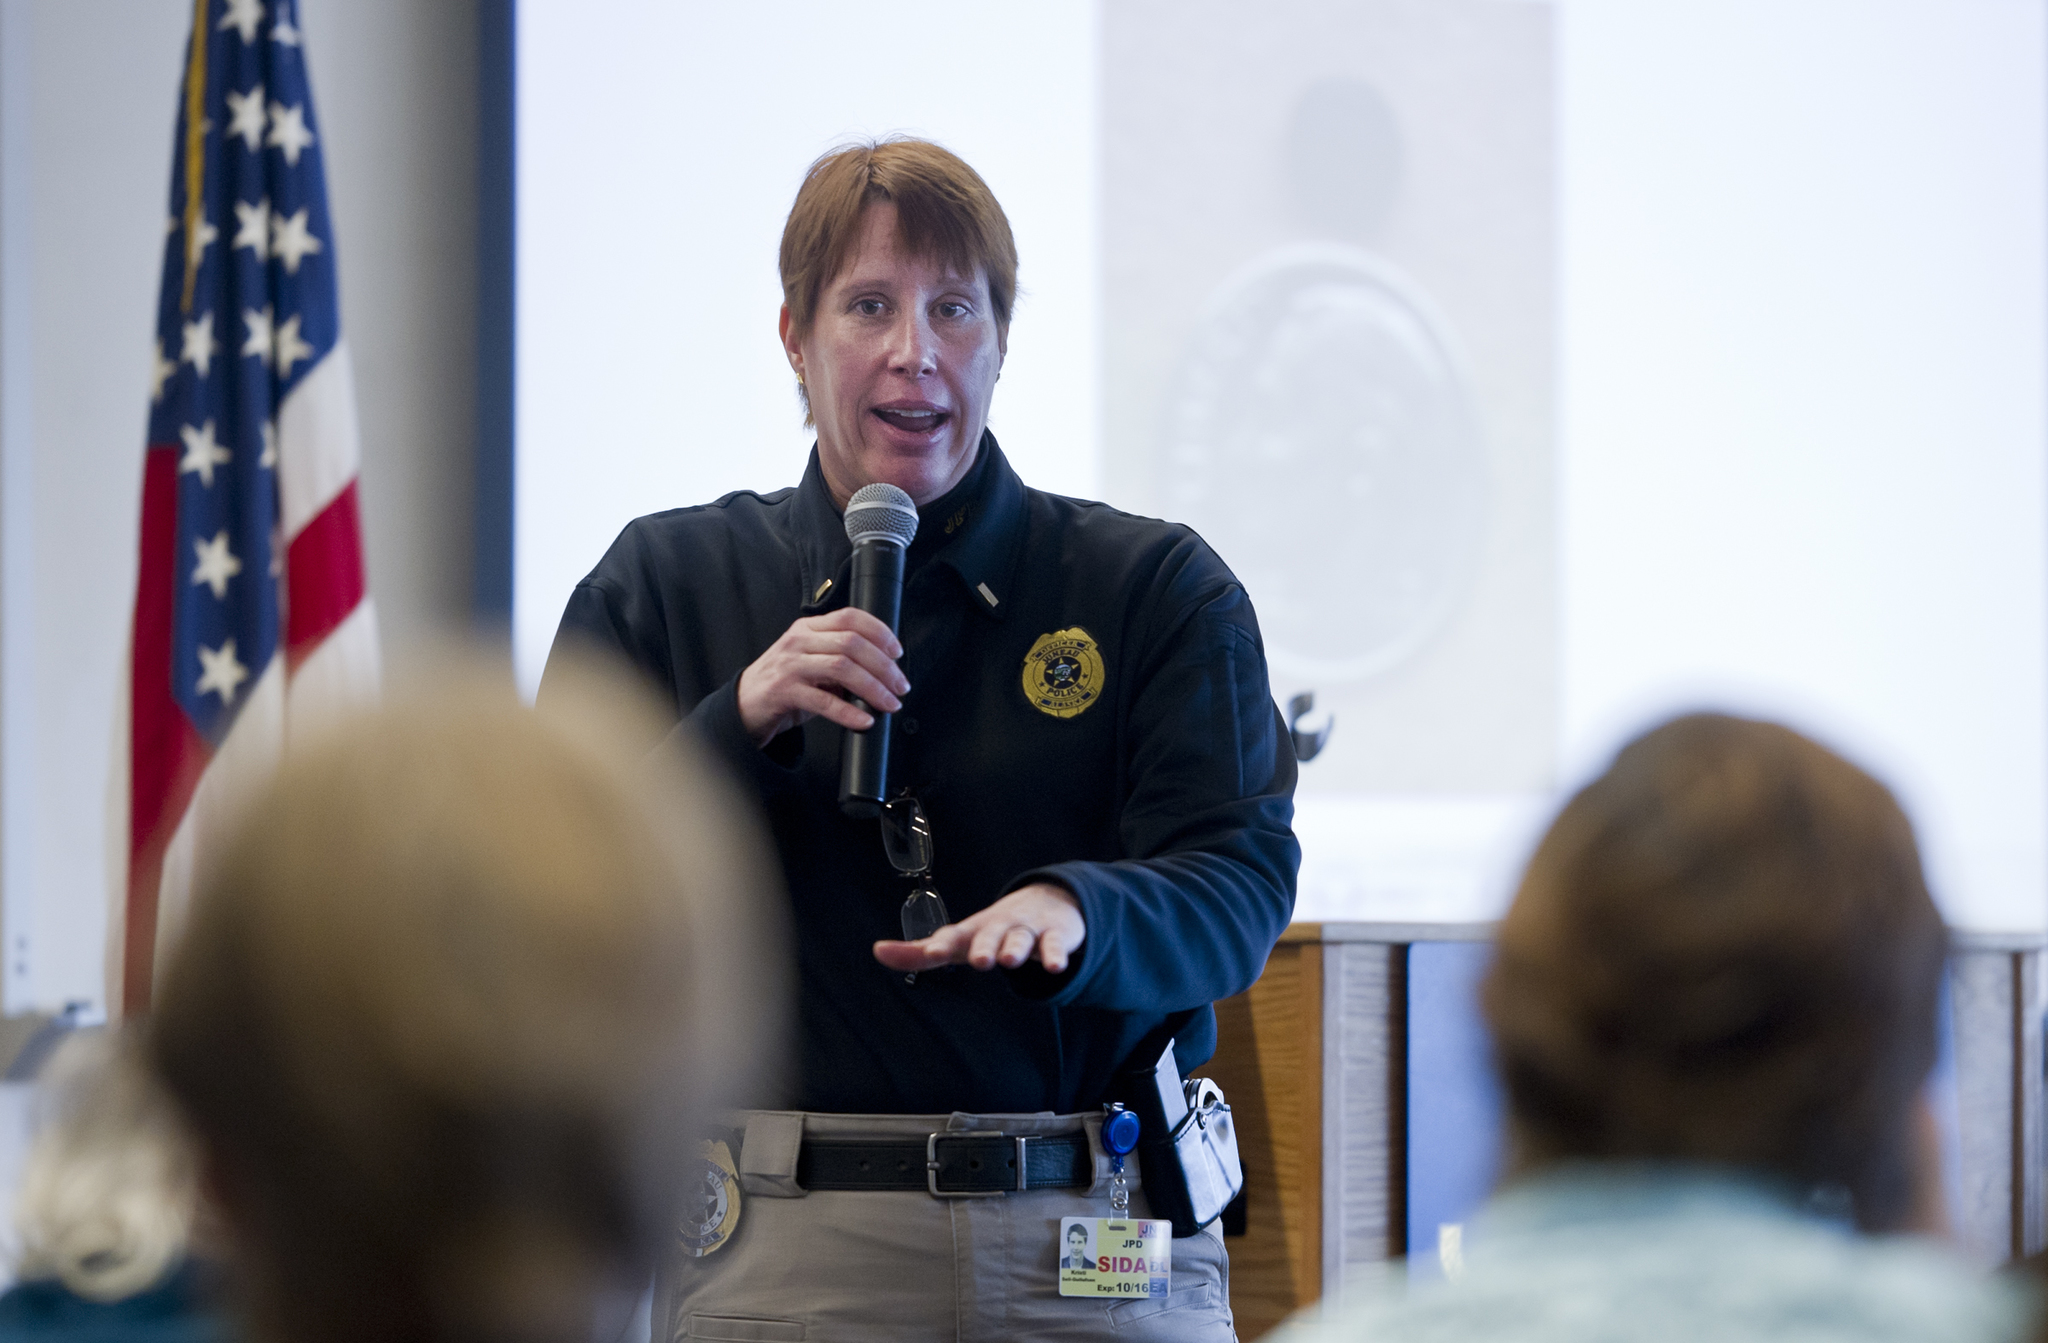 In this December 2015 file photo, Juneau Police Department Lt. Kris Sell speaks to the Juneau Chamber of Commerce about the recent uptick in heroin usage and violent crime in Juneau. (Michael Penn/Juneau Empire File)